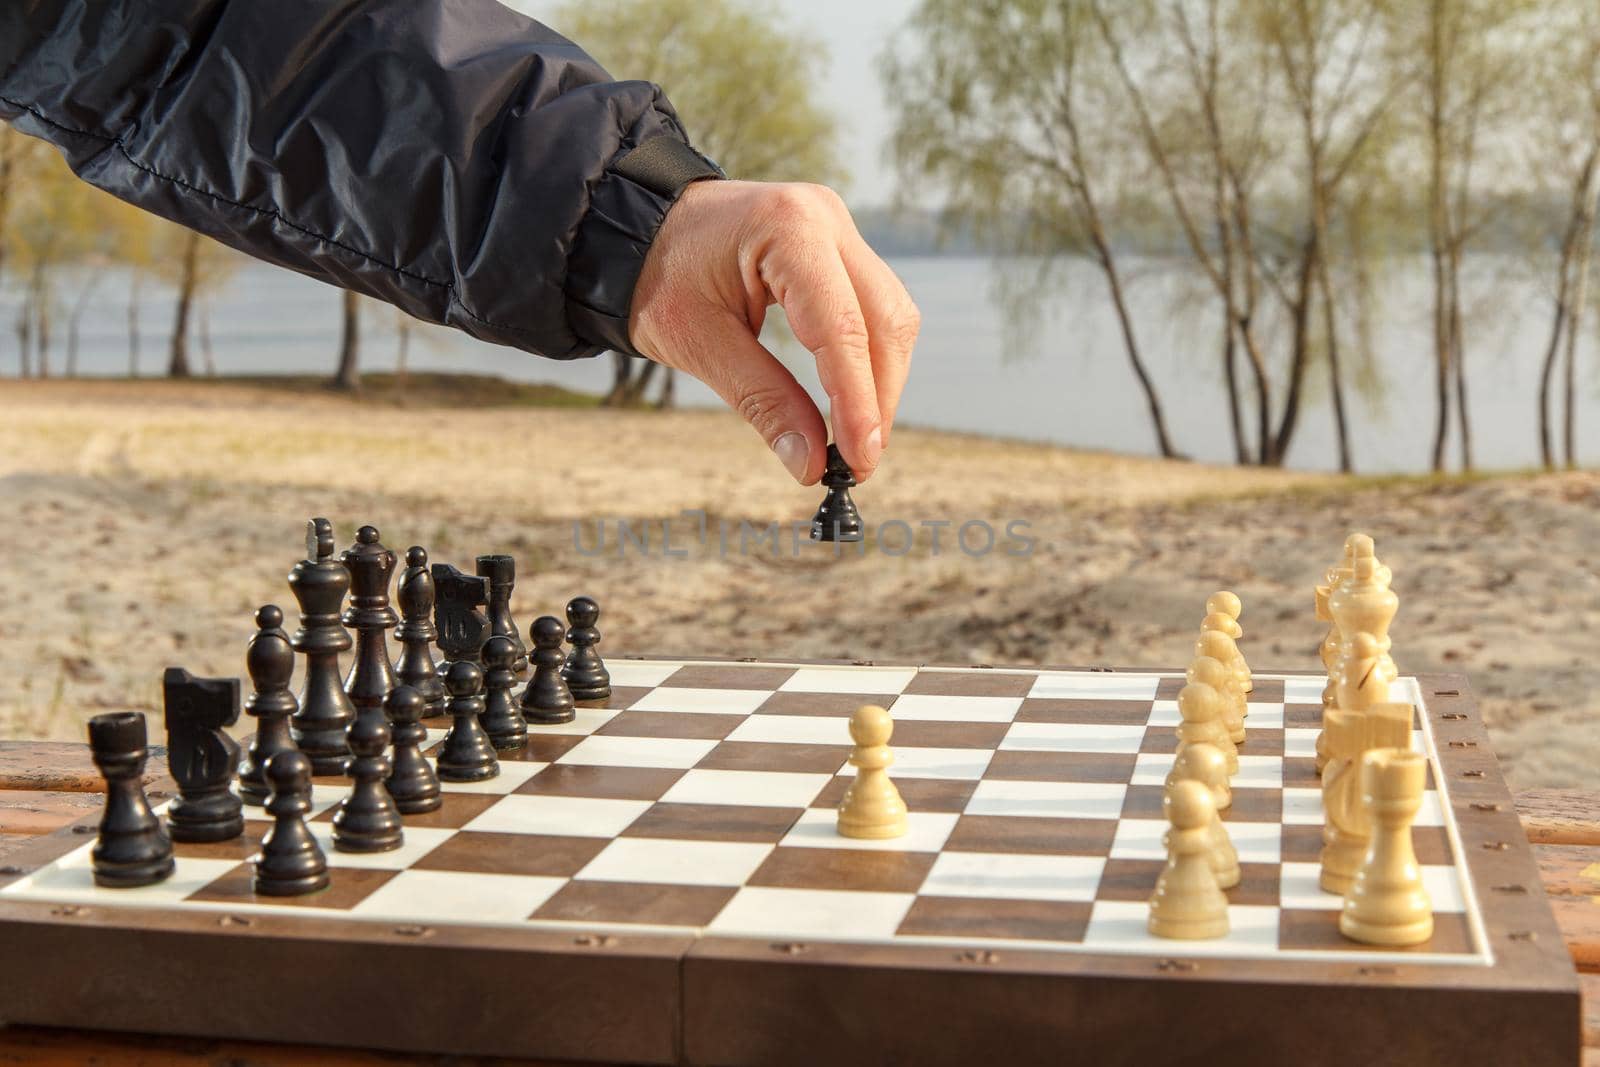 Male hand is hollding a pawn The second move in a game of chess Shallow depth of field focusing on players hand